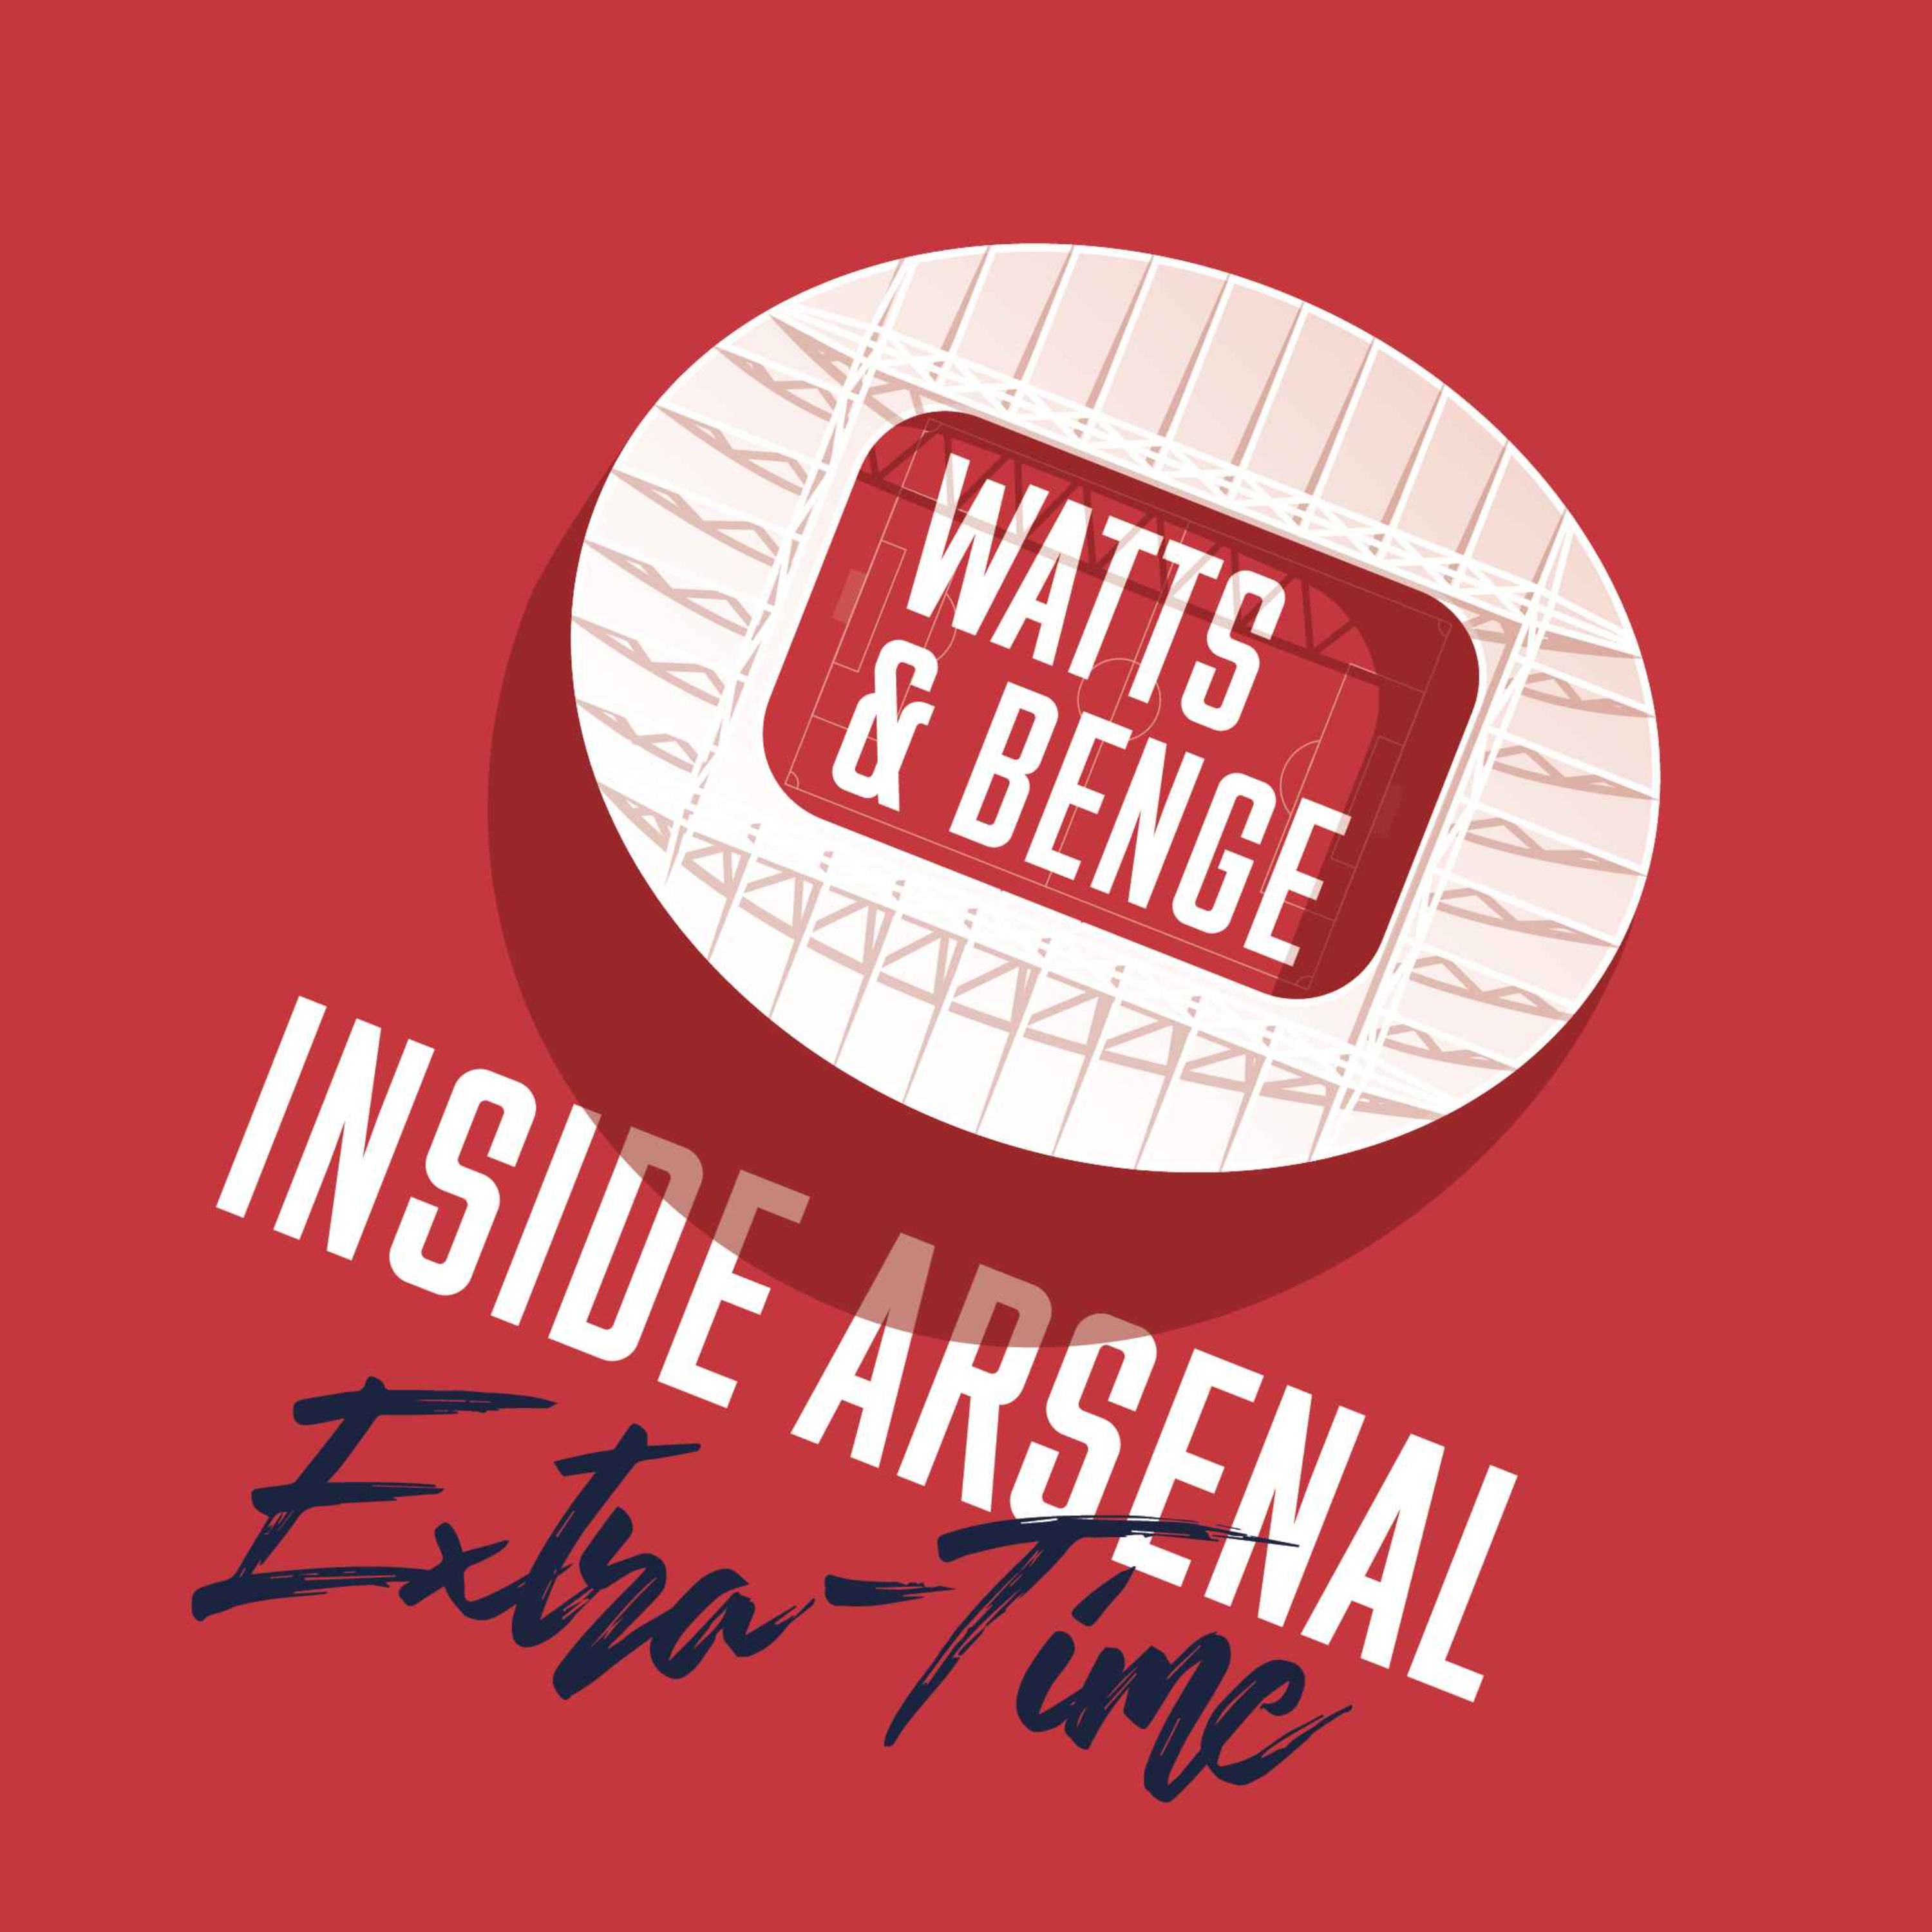 Extra-time with James Benge - The Everton hoodoo | Striker wish lists | Pepe's legacy